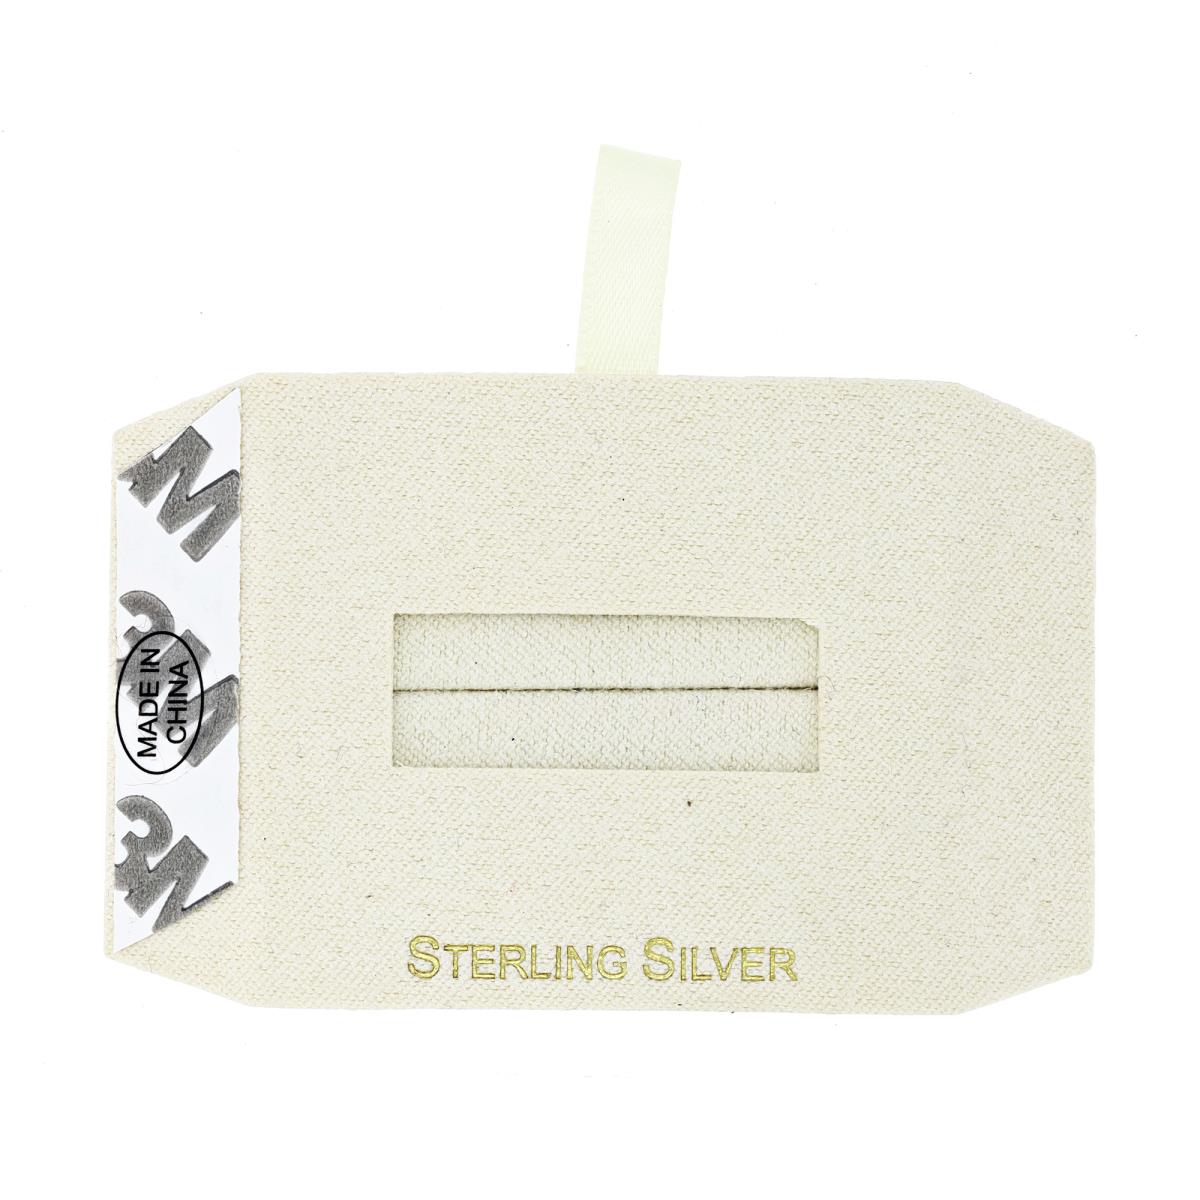 Ivory Sterling Silver, Gold Foil Ring Insert (Box B06-159/Ivory/M)